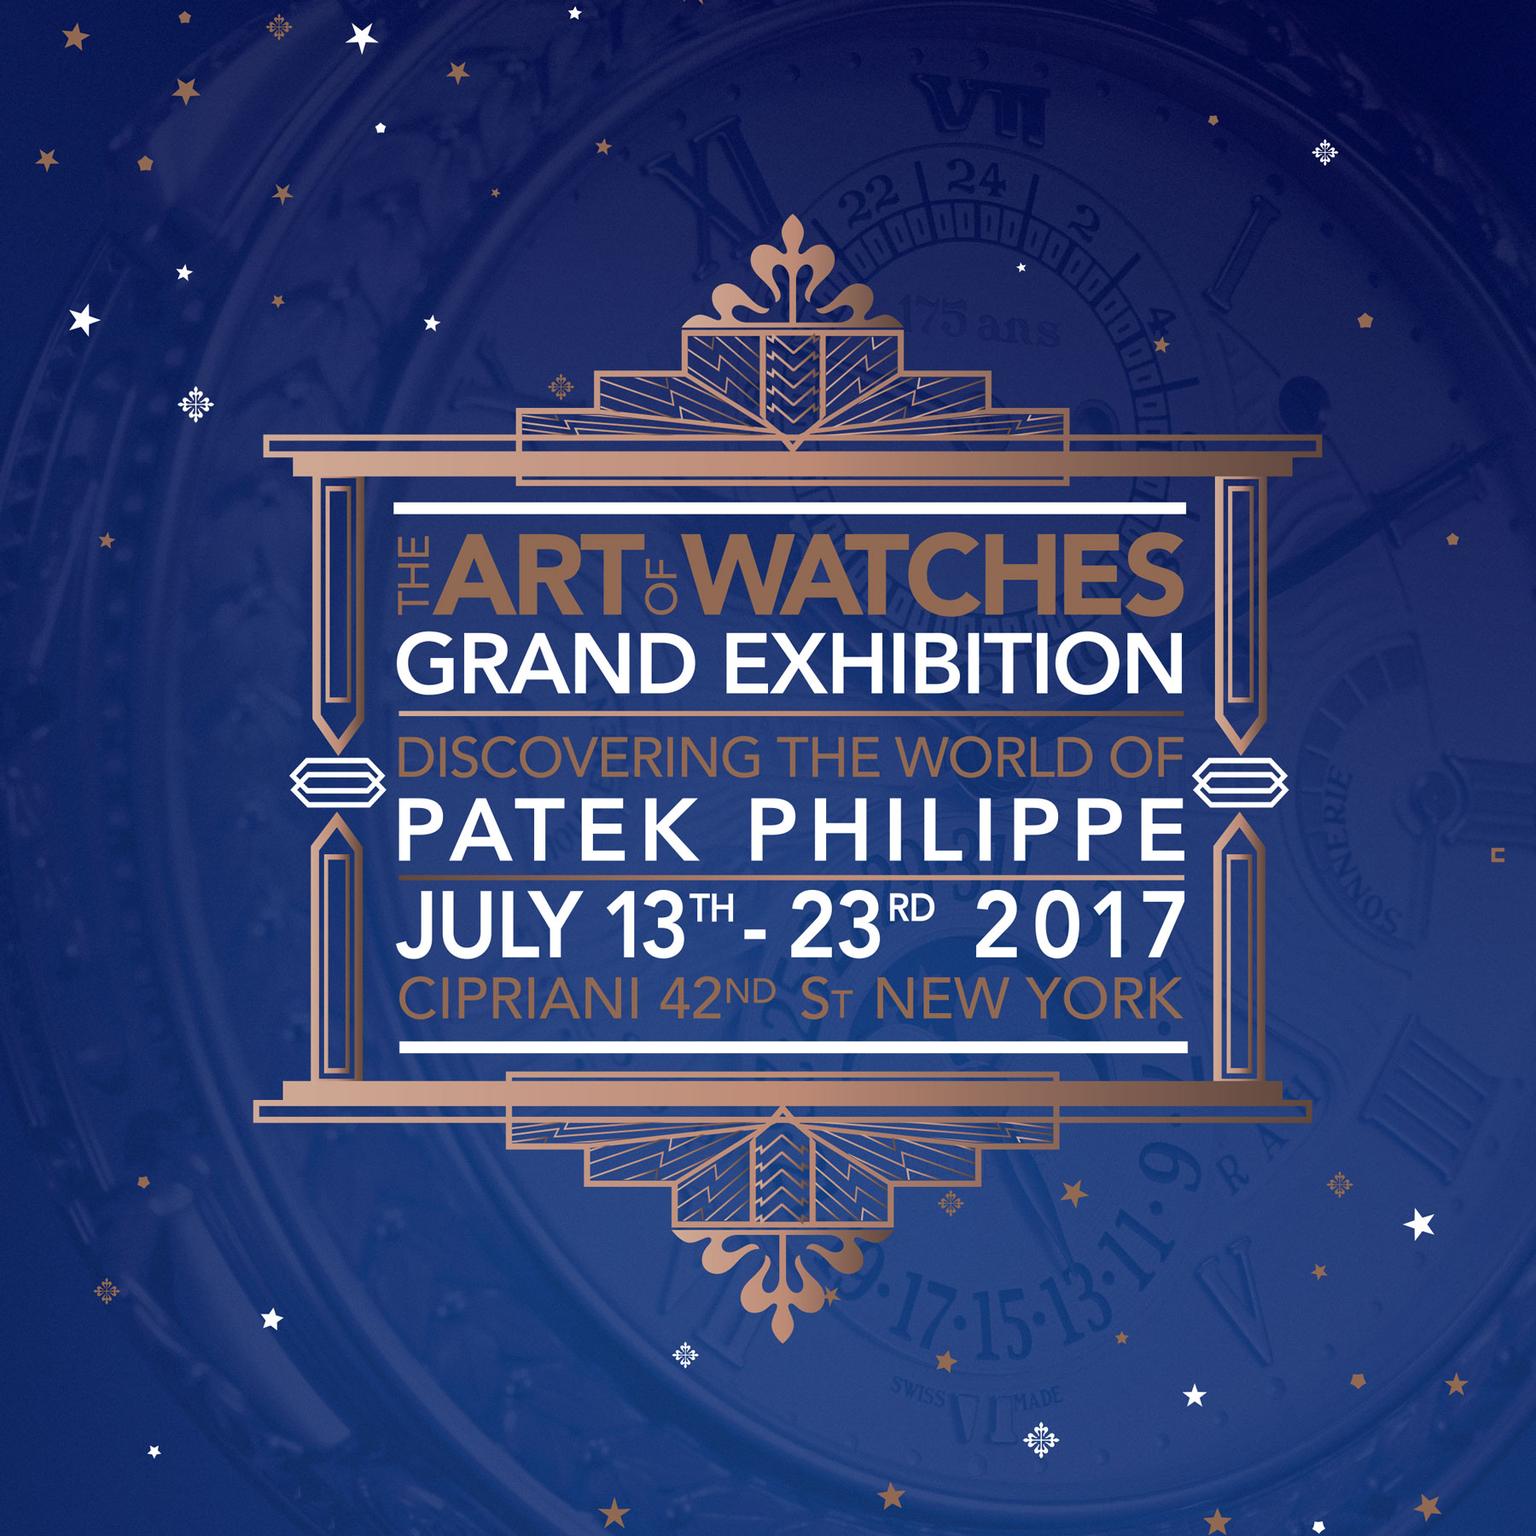 Patek Philippe's The Art of Watches Grand Exhibition logo